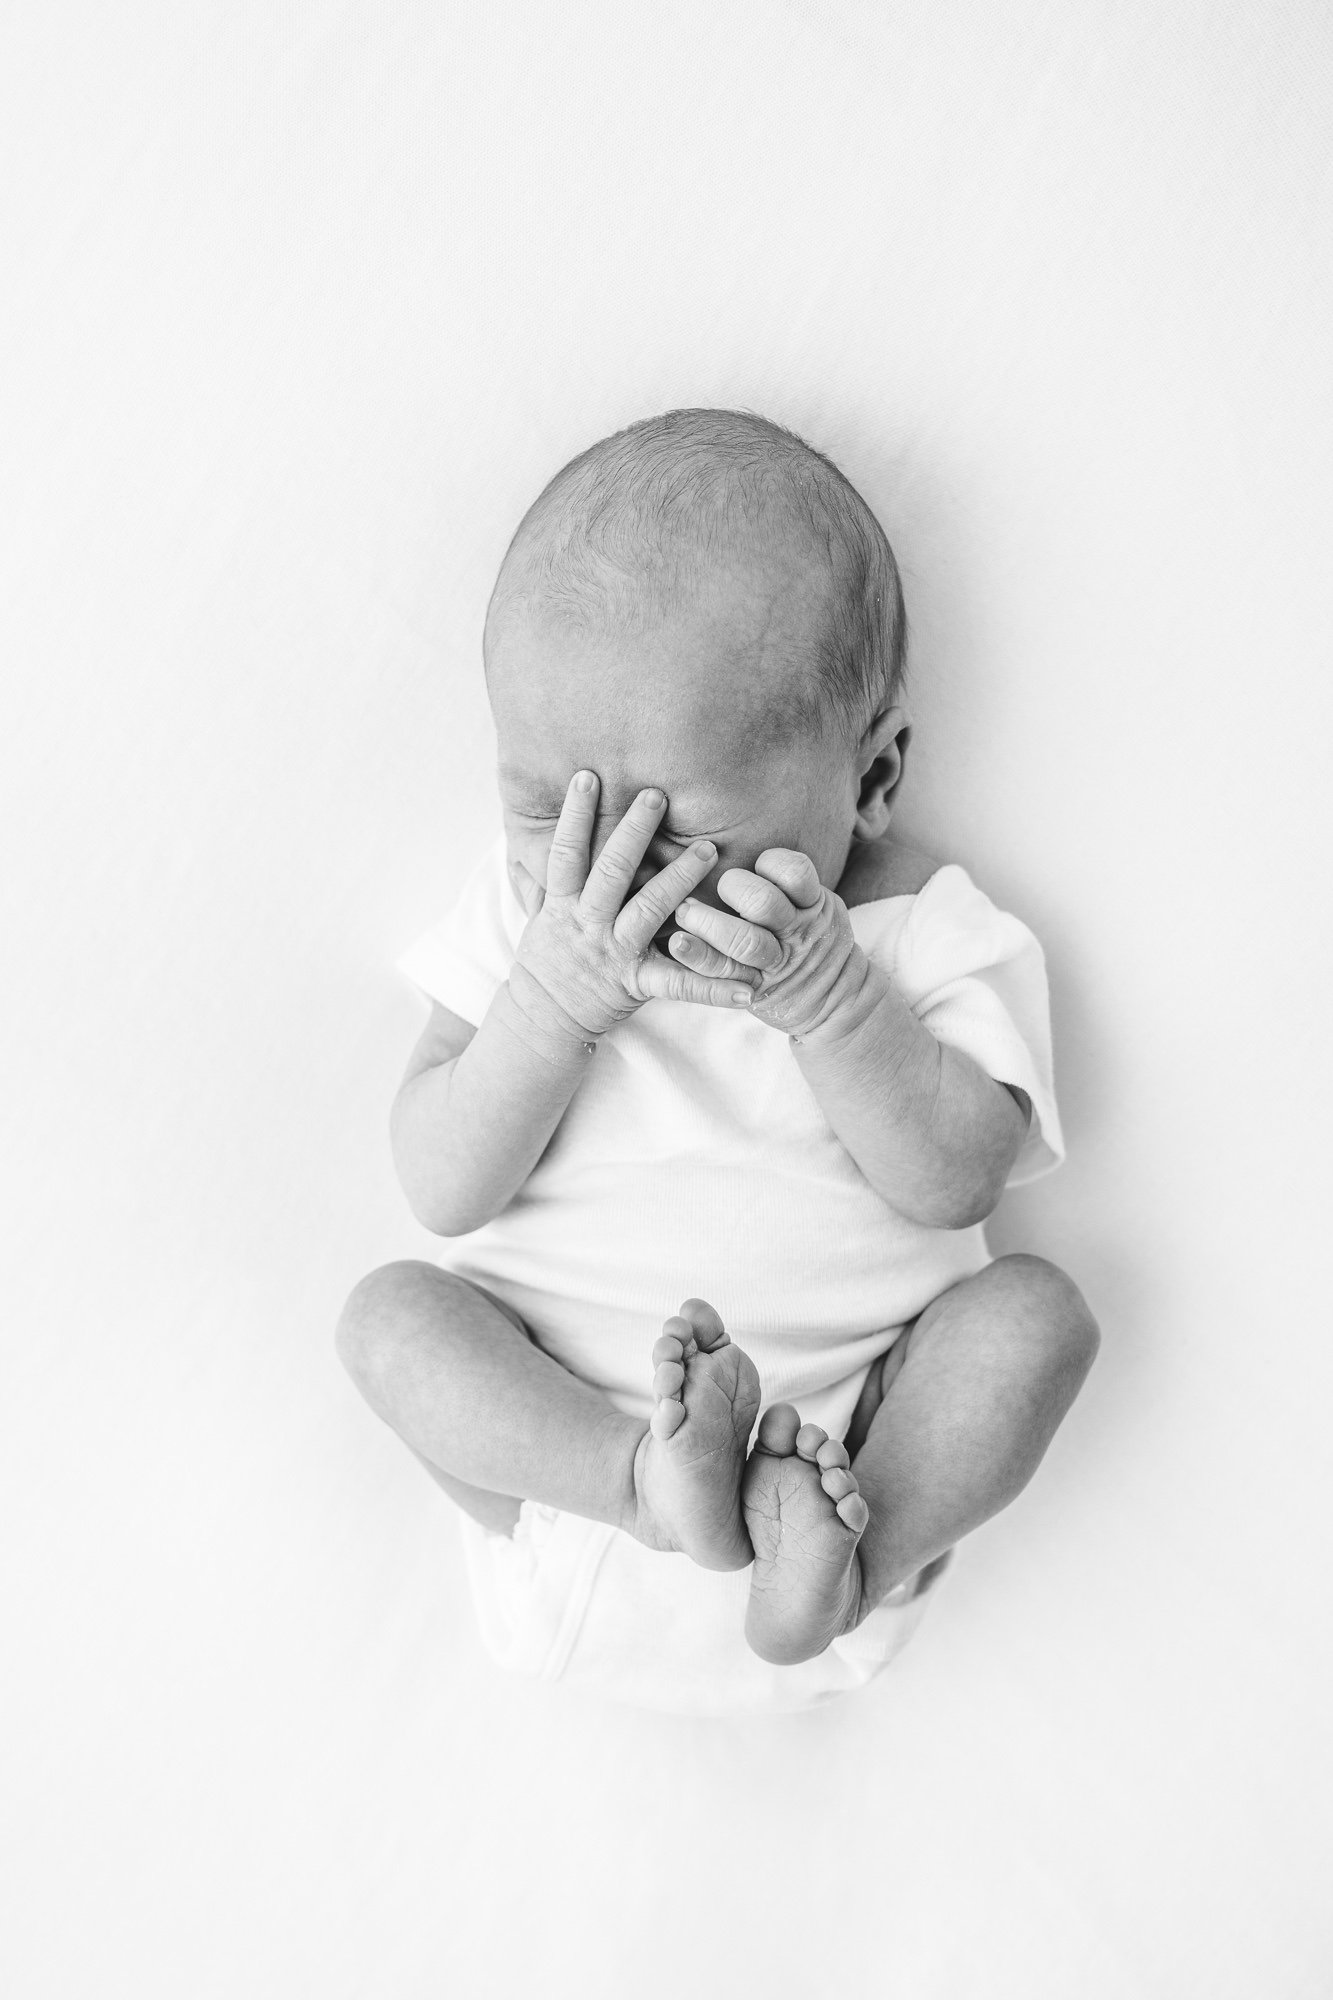  The cutest newborn covers her face with her hands and keeps her feet close to her body. Nicole Hawkins photography captured the cutest moment in New Jersey portrait studio. #instudionewbornsession #NicoleHawkinsphotography #newbornportraits #NewJers